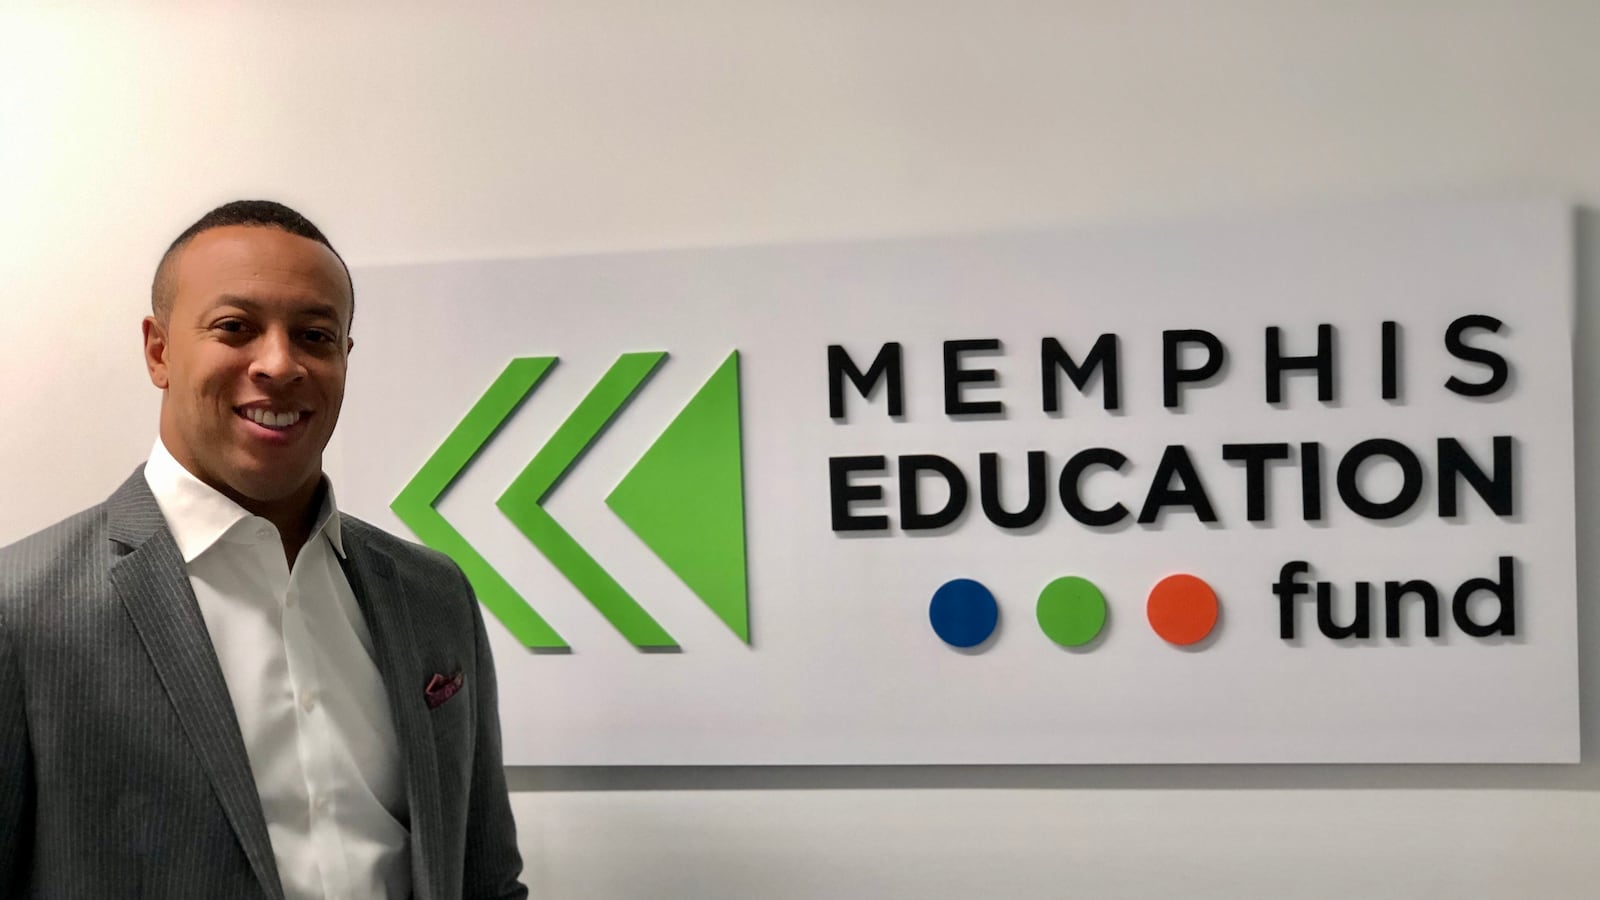 Terence Patterson was the former head of the Downtown Memphis Commission and has been on the Education Fund’s board since it began as Teacher Town.